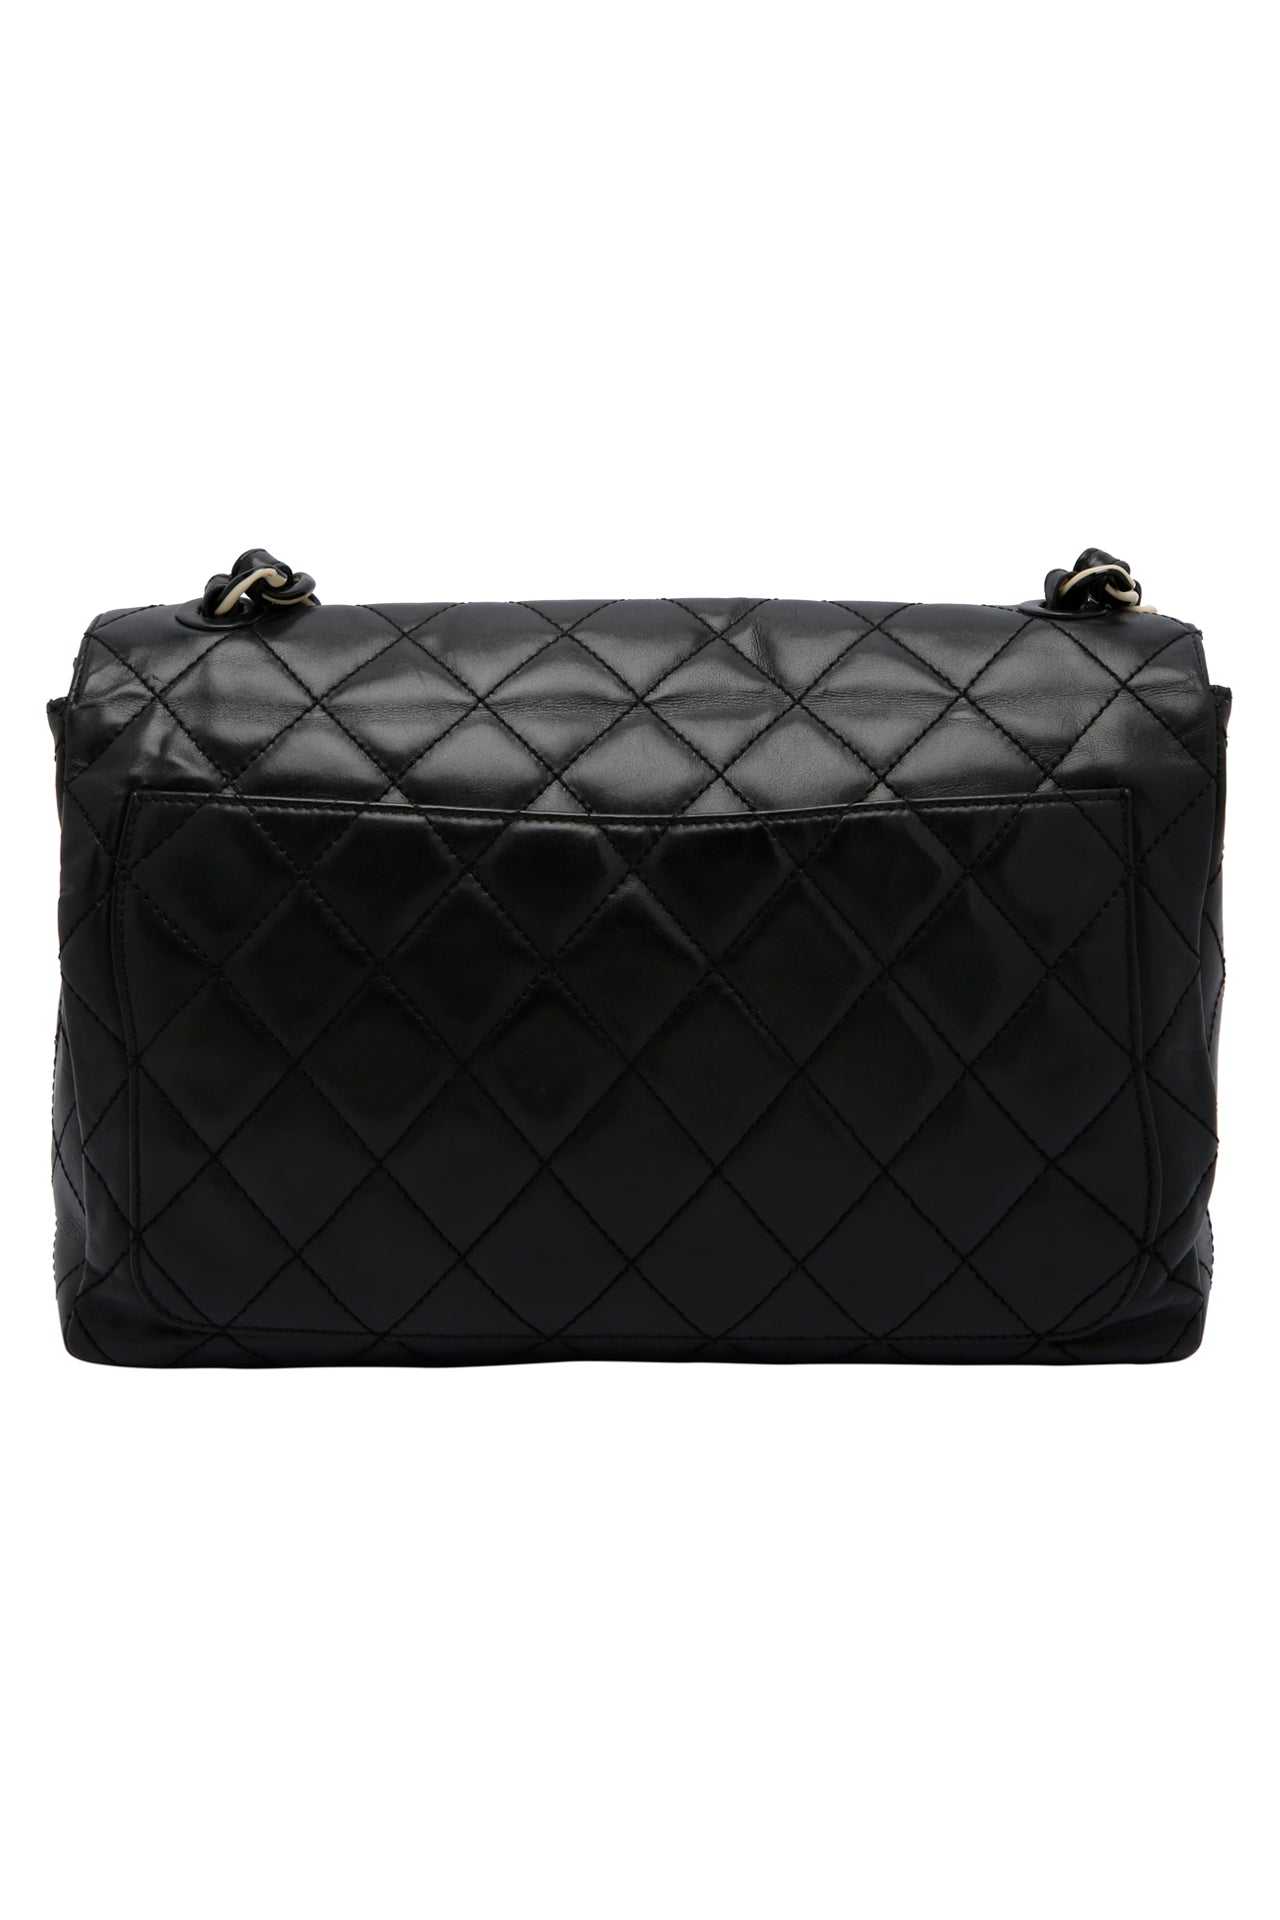 Chanel Black Quilted Calfskin Leather Jumbo Classic Single Flap Bag